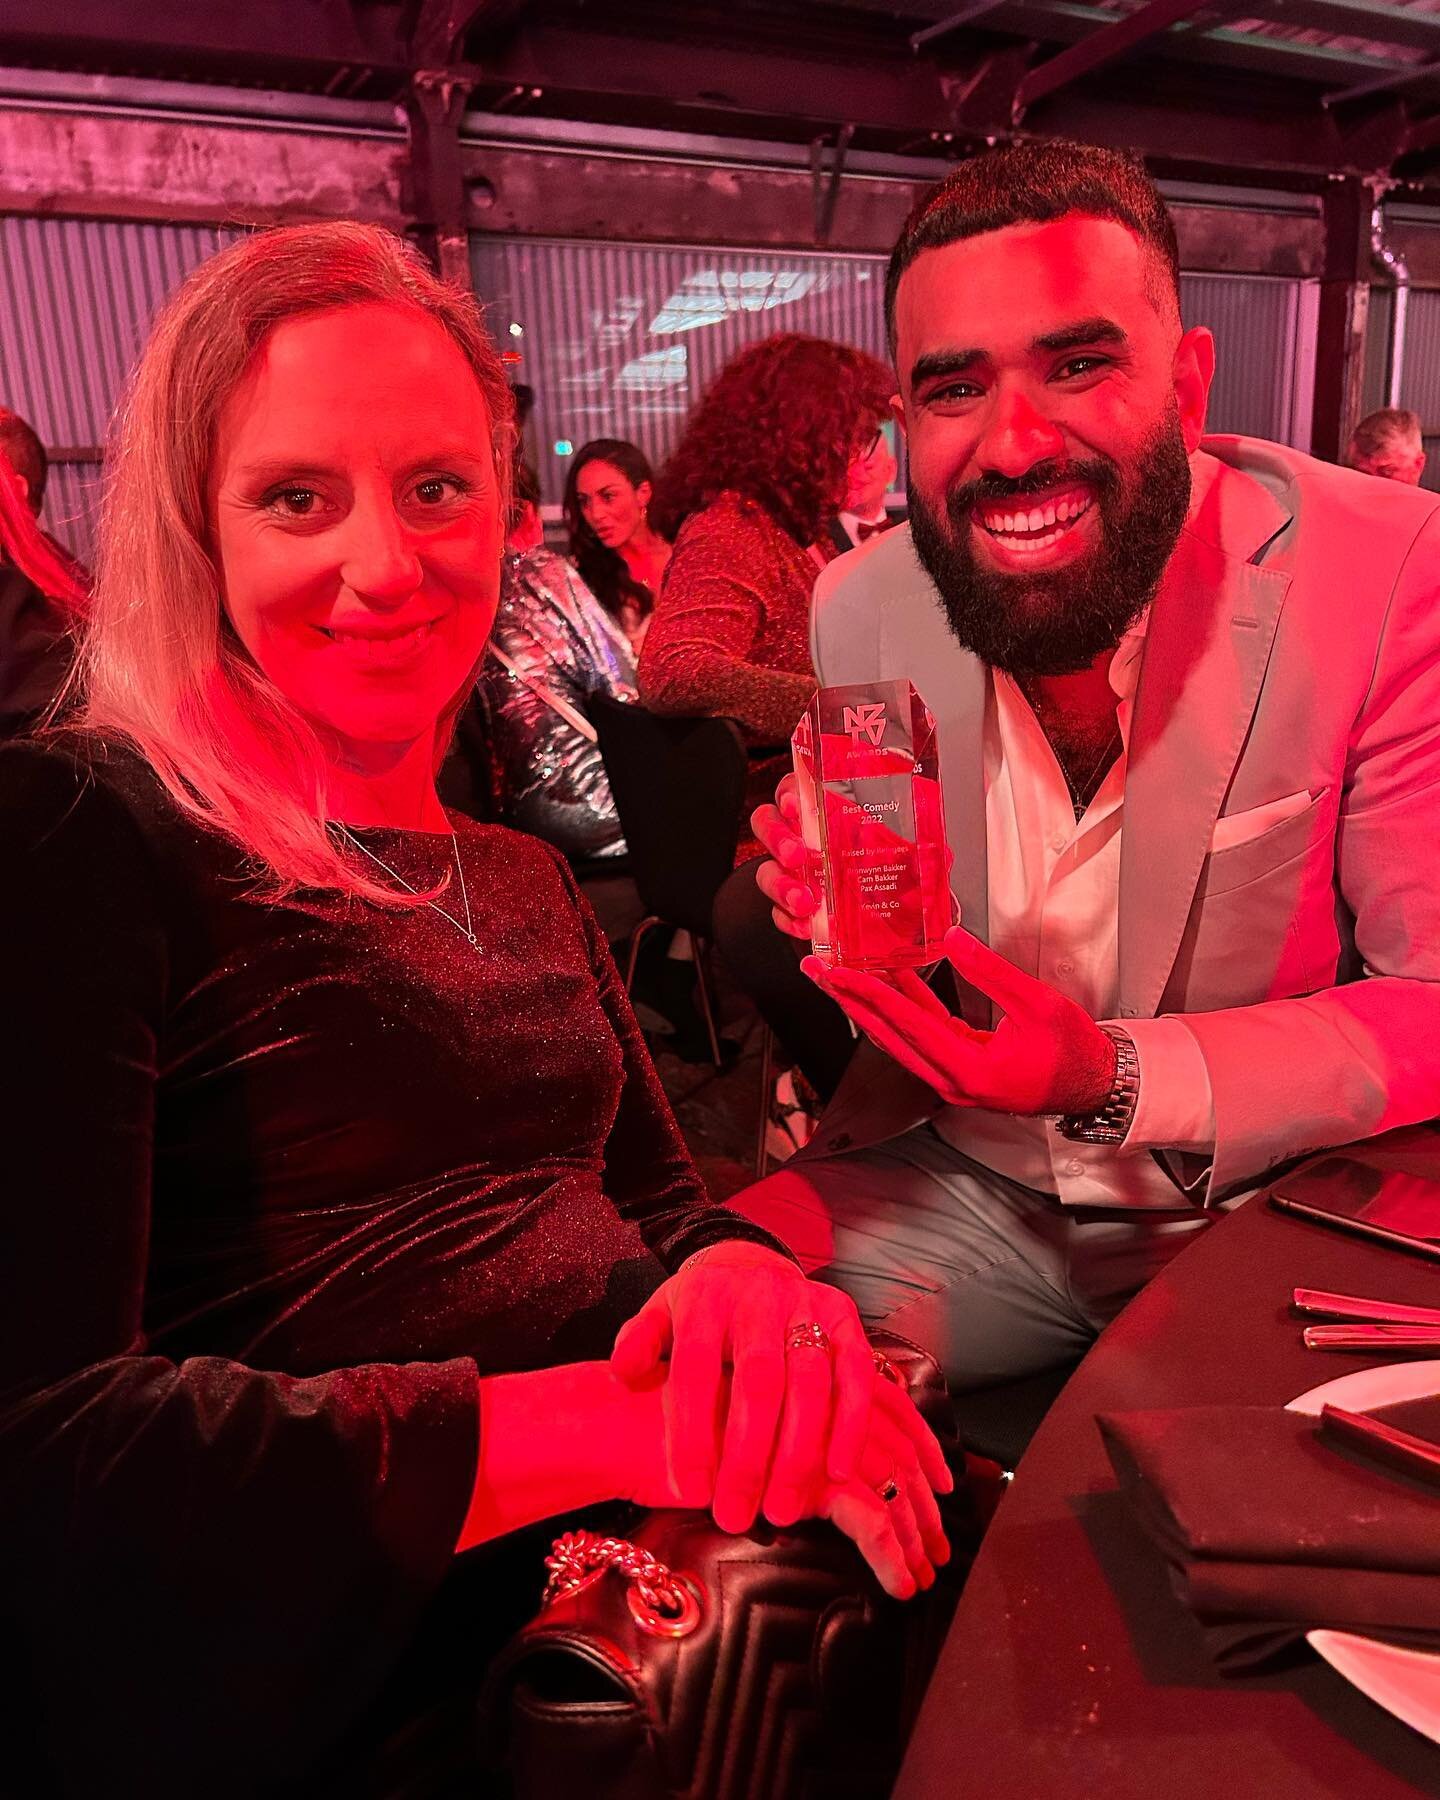 Raised by Refugees winner of best comedy at the @newzealandtelevisionawards.
Thanks @nz_on_air and @skynz.
Dream come true.